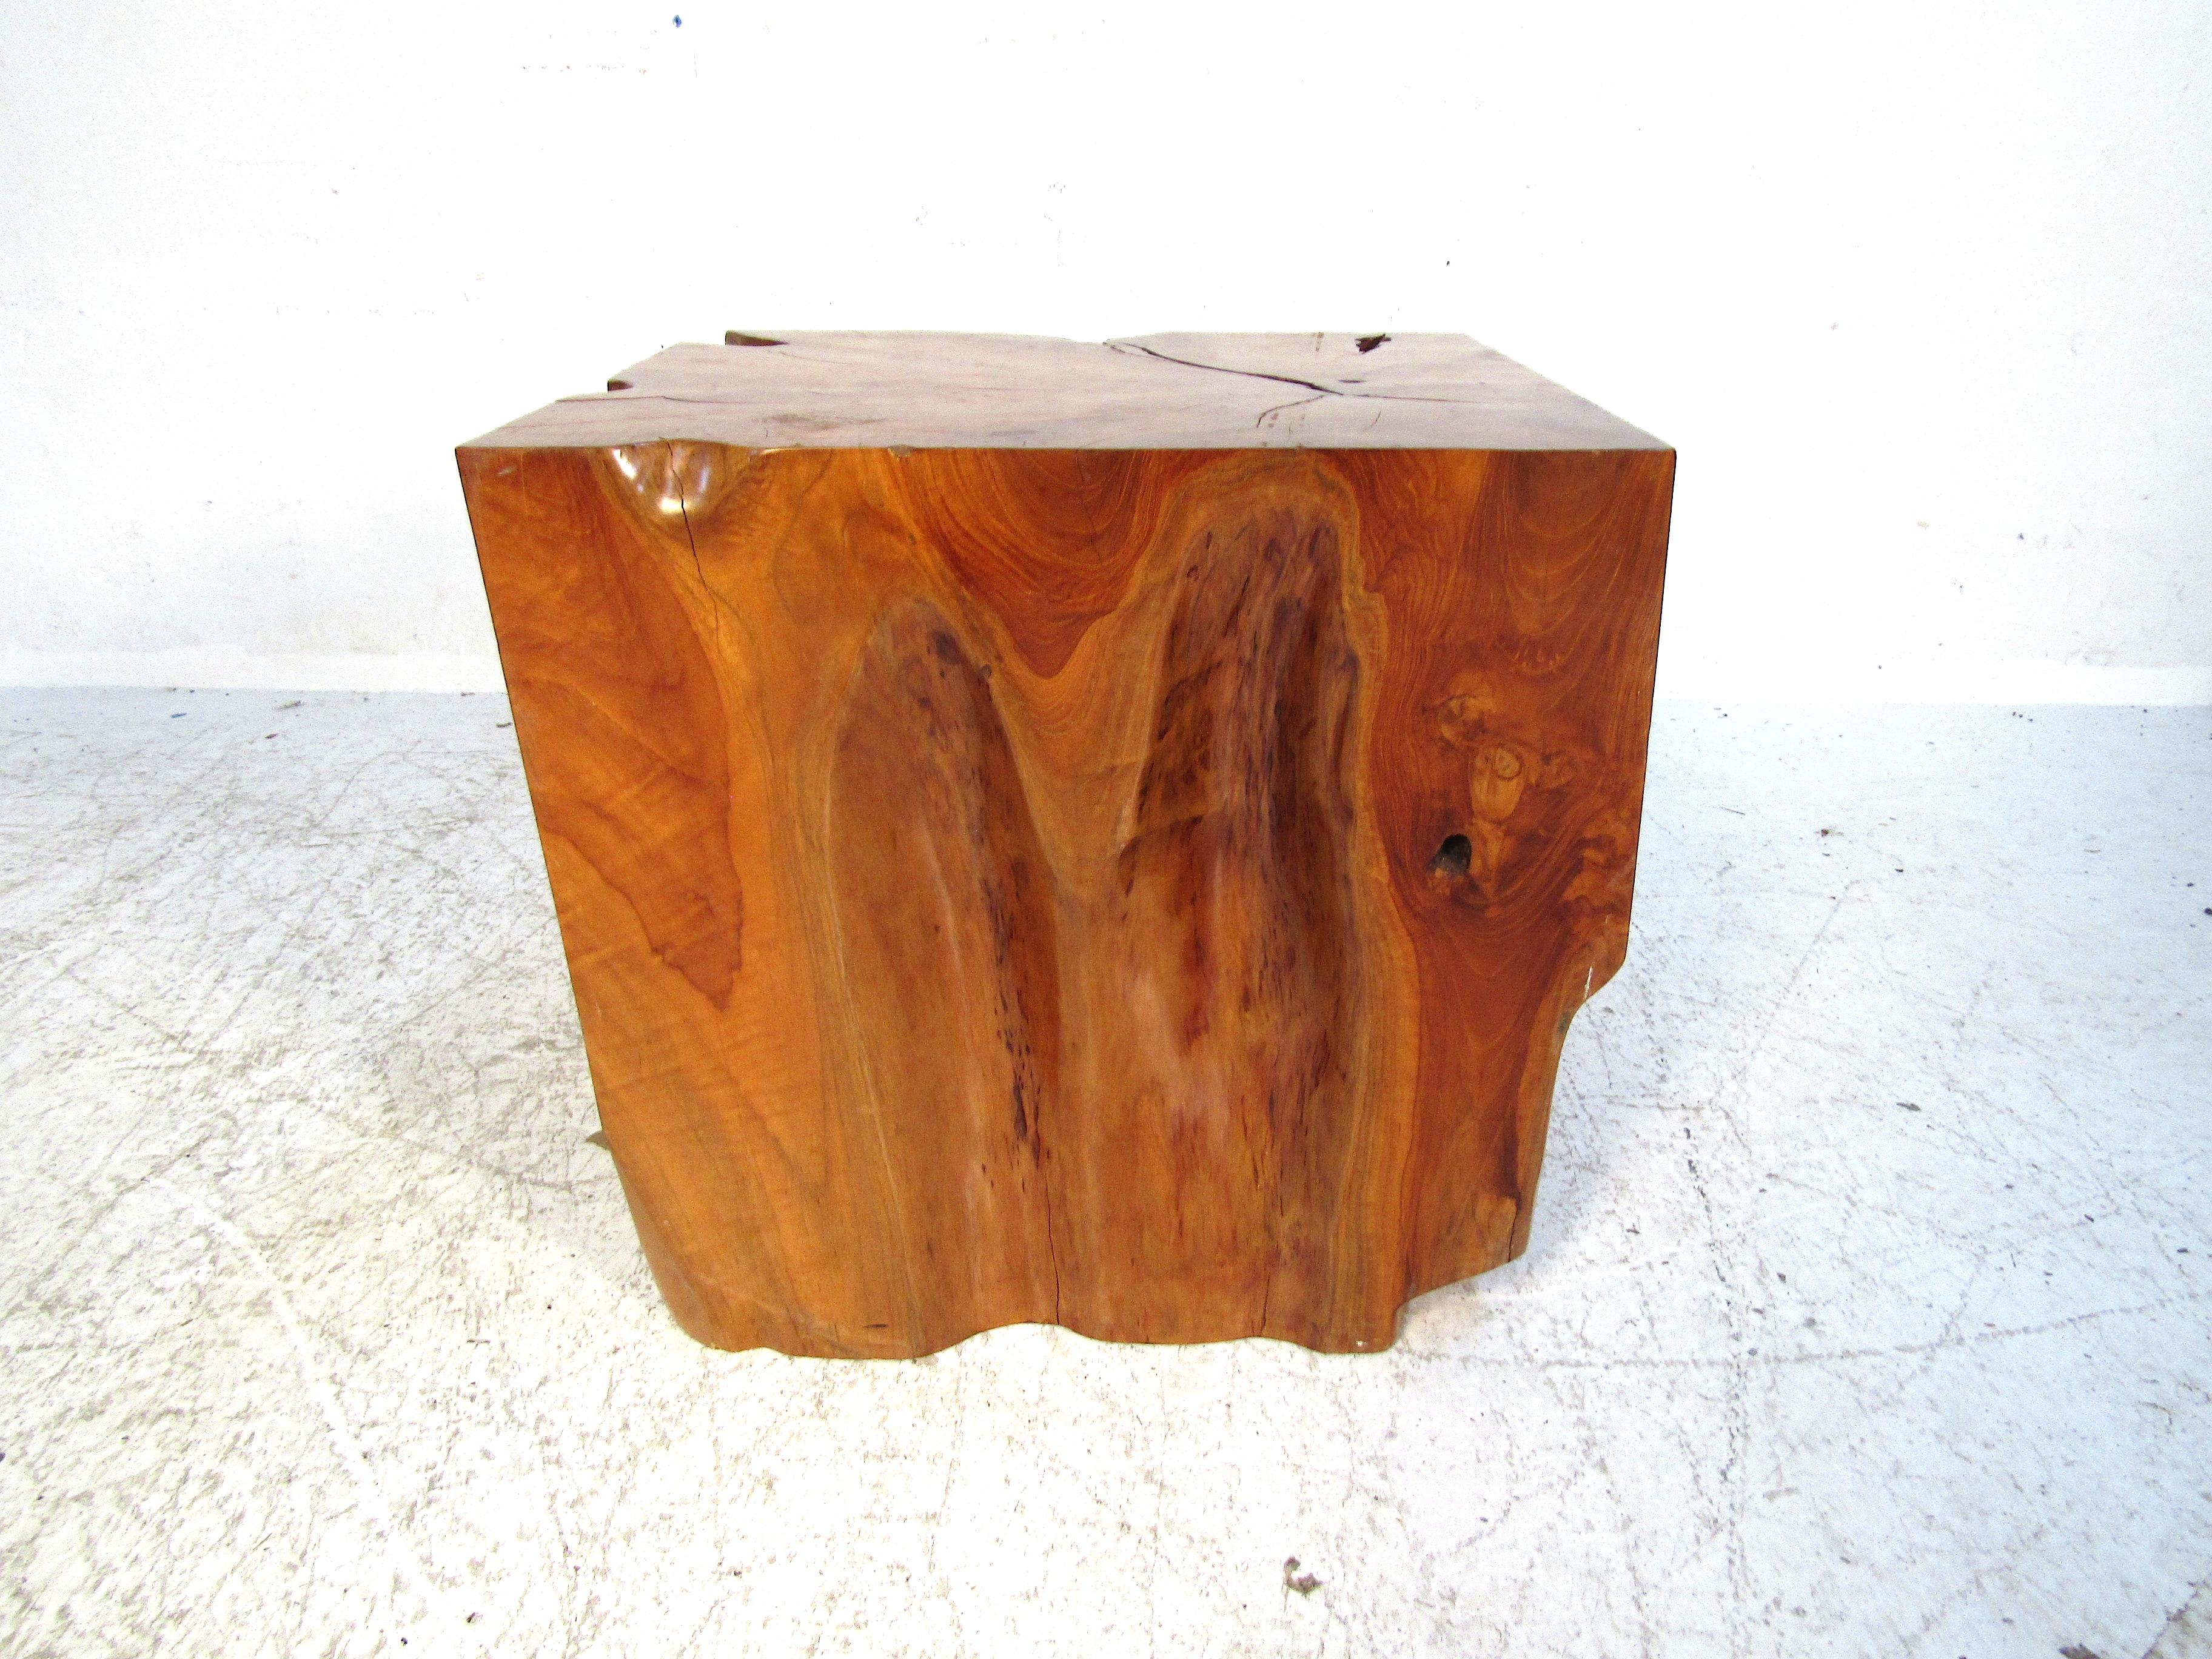 This beautiful one of a kind side table will impress even the harshest of critics. Made of red oak this piece is one solid piece of wood cut from where the tree trunk meets the root system of the tree. This creates stunningly unique and varied grain